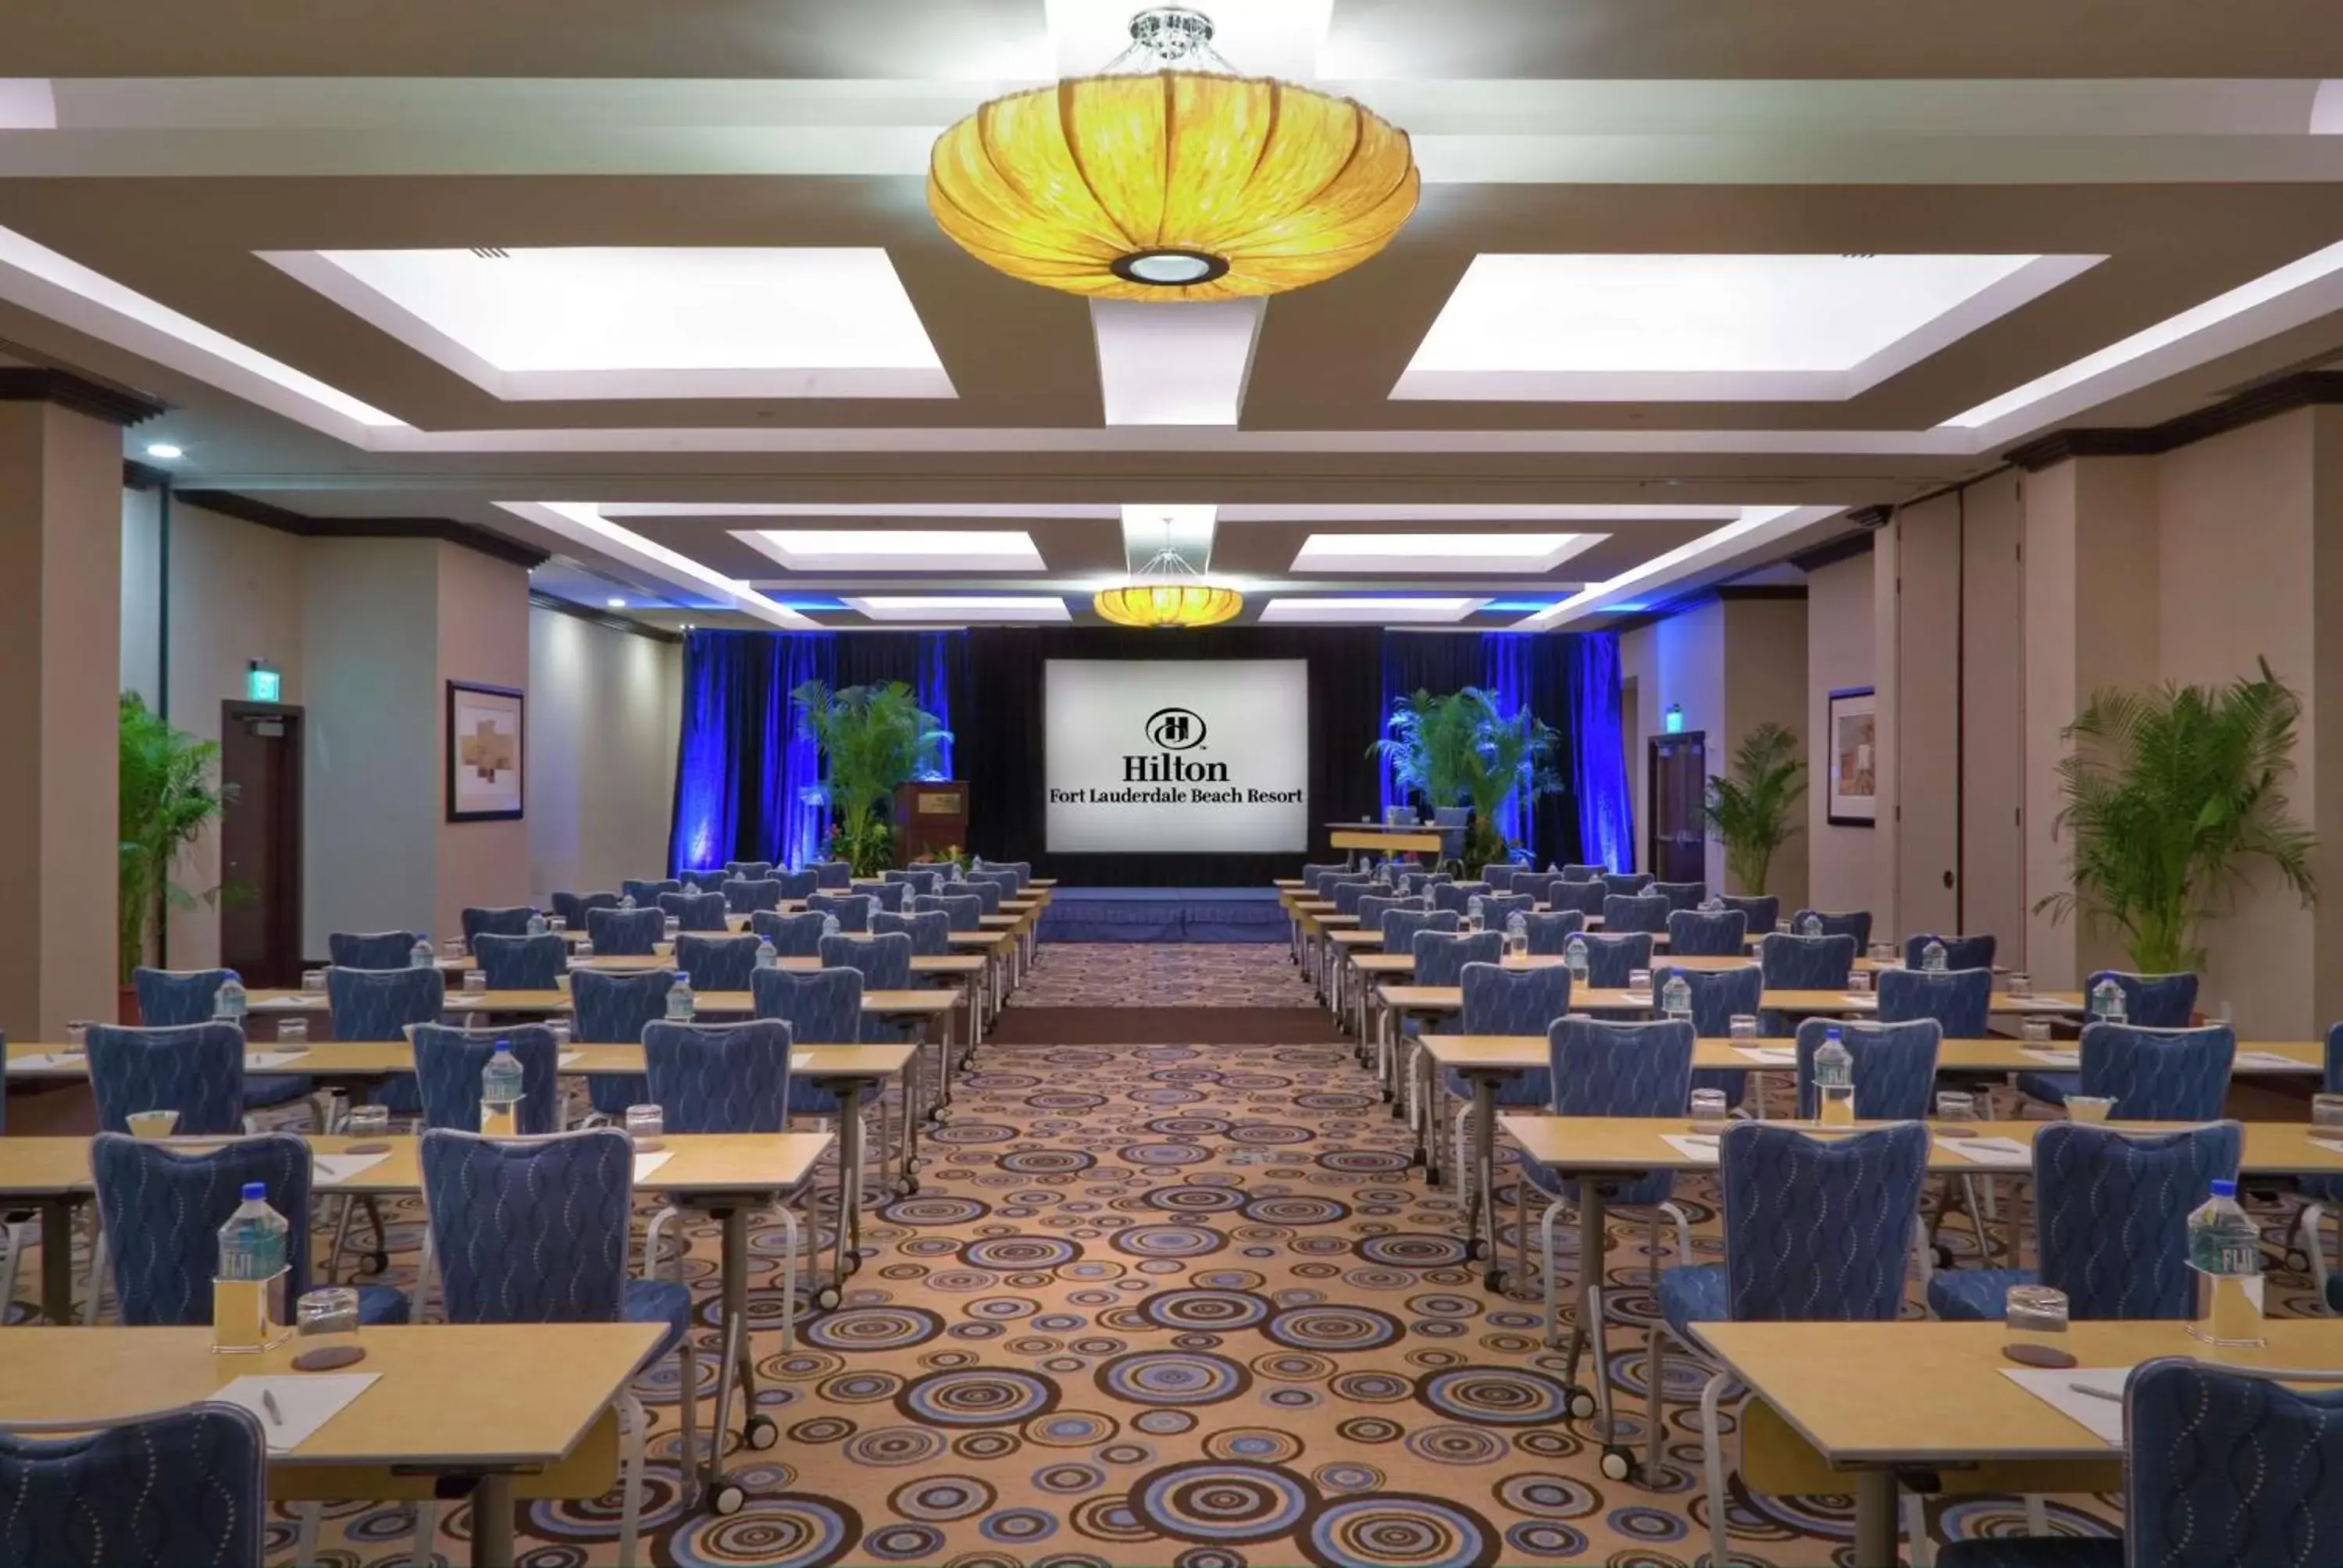 Meeting/conference room in Hilton Fort Lauderdale Beach Resort